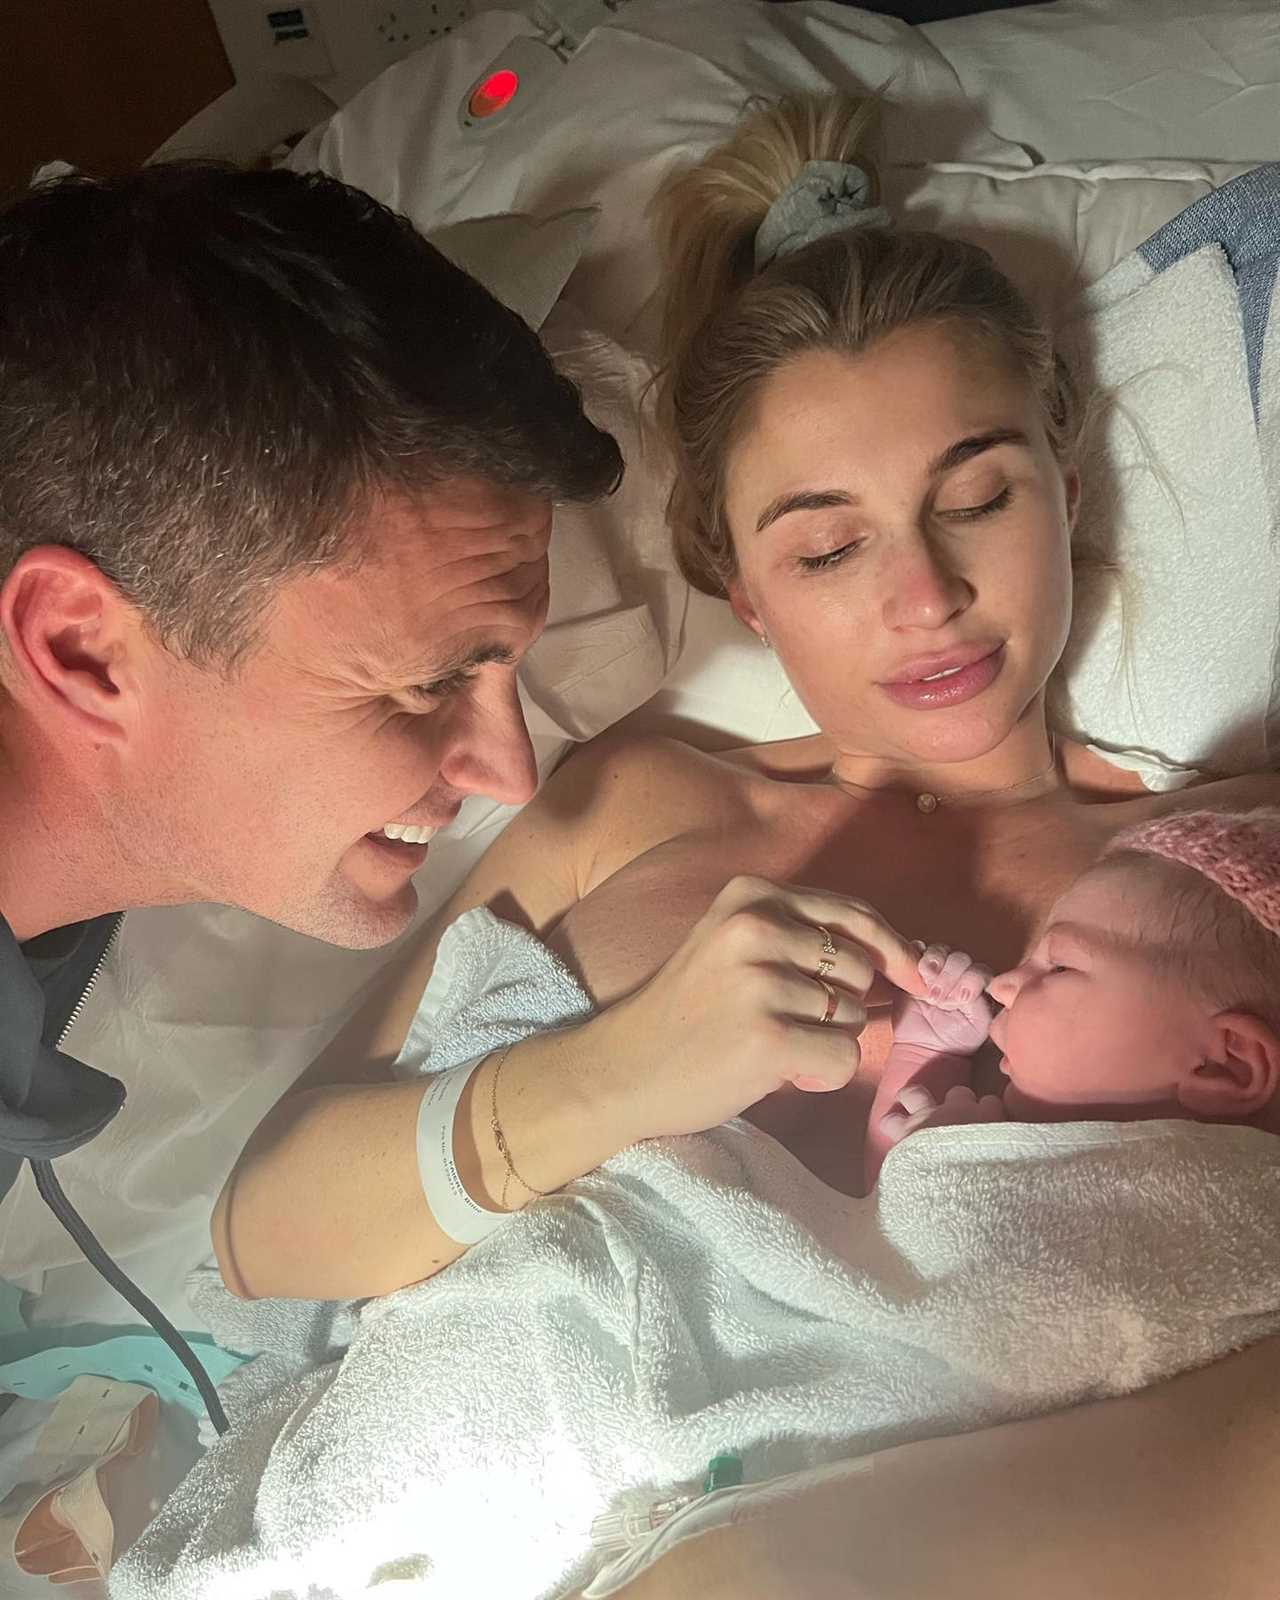 Billie Faiers opens up about being a family of five days before giving birth to baby girl